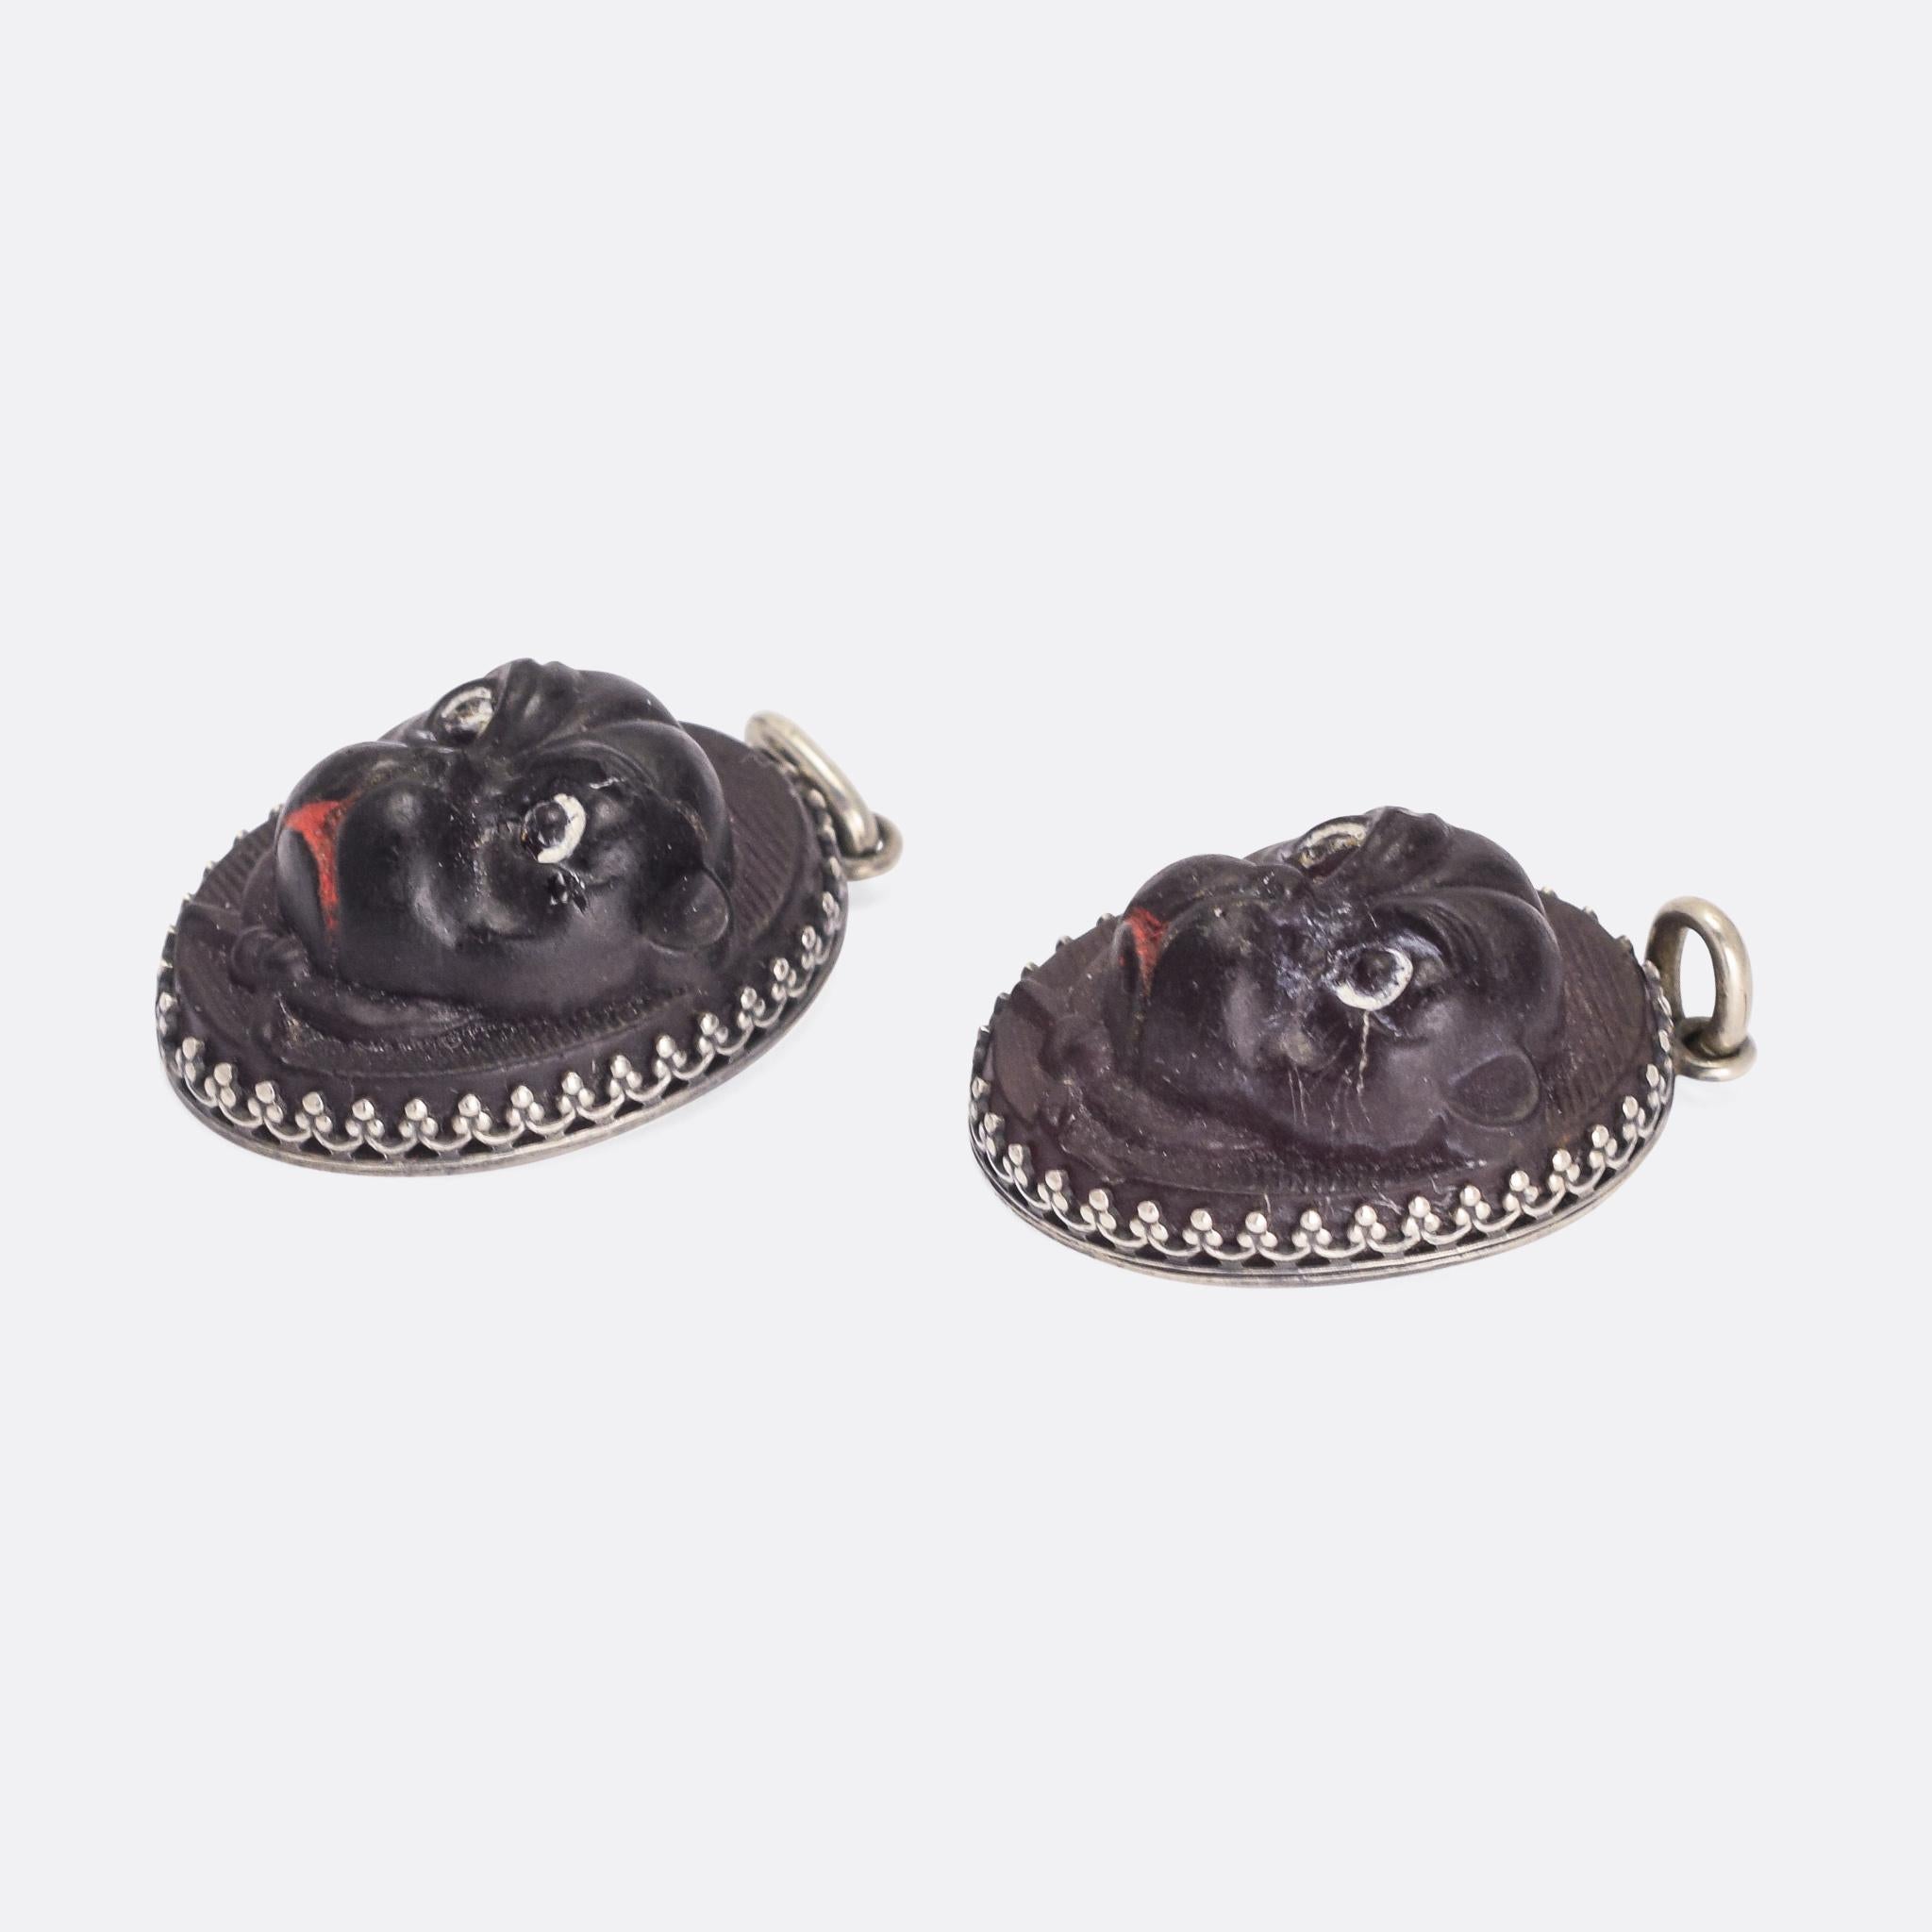 An incredible Victorian carved glass pug pendant mounted in silver . It has painted eyes and mouth and a bow tied under the chin; it's made of deep purple coloured glass. The mount features Etruscan-style embellishment, and it dates from the latter